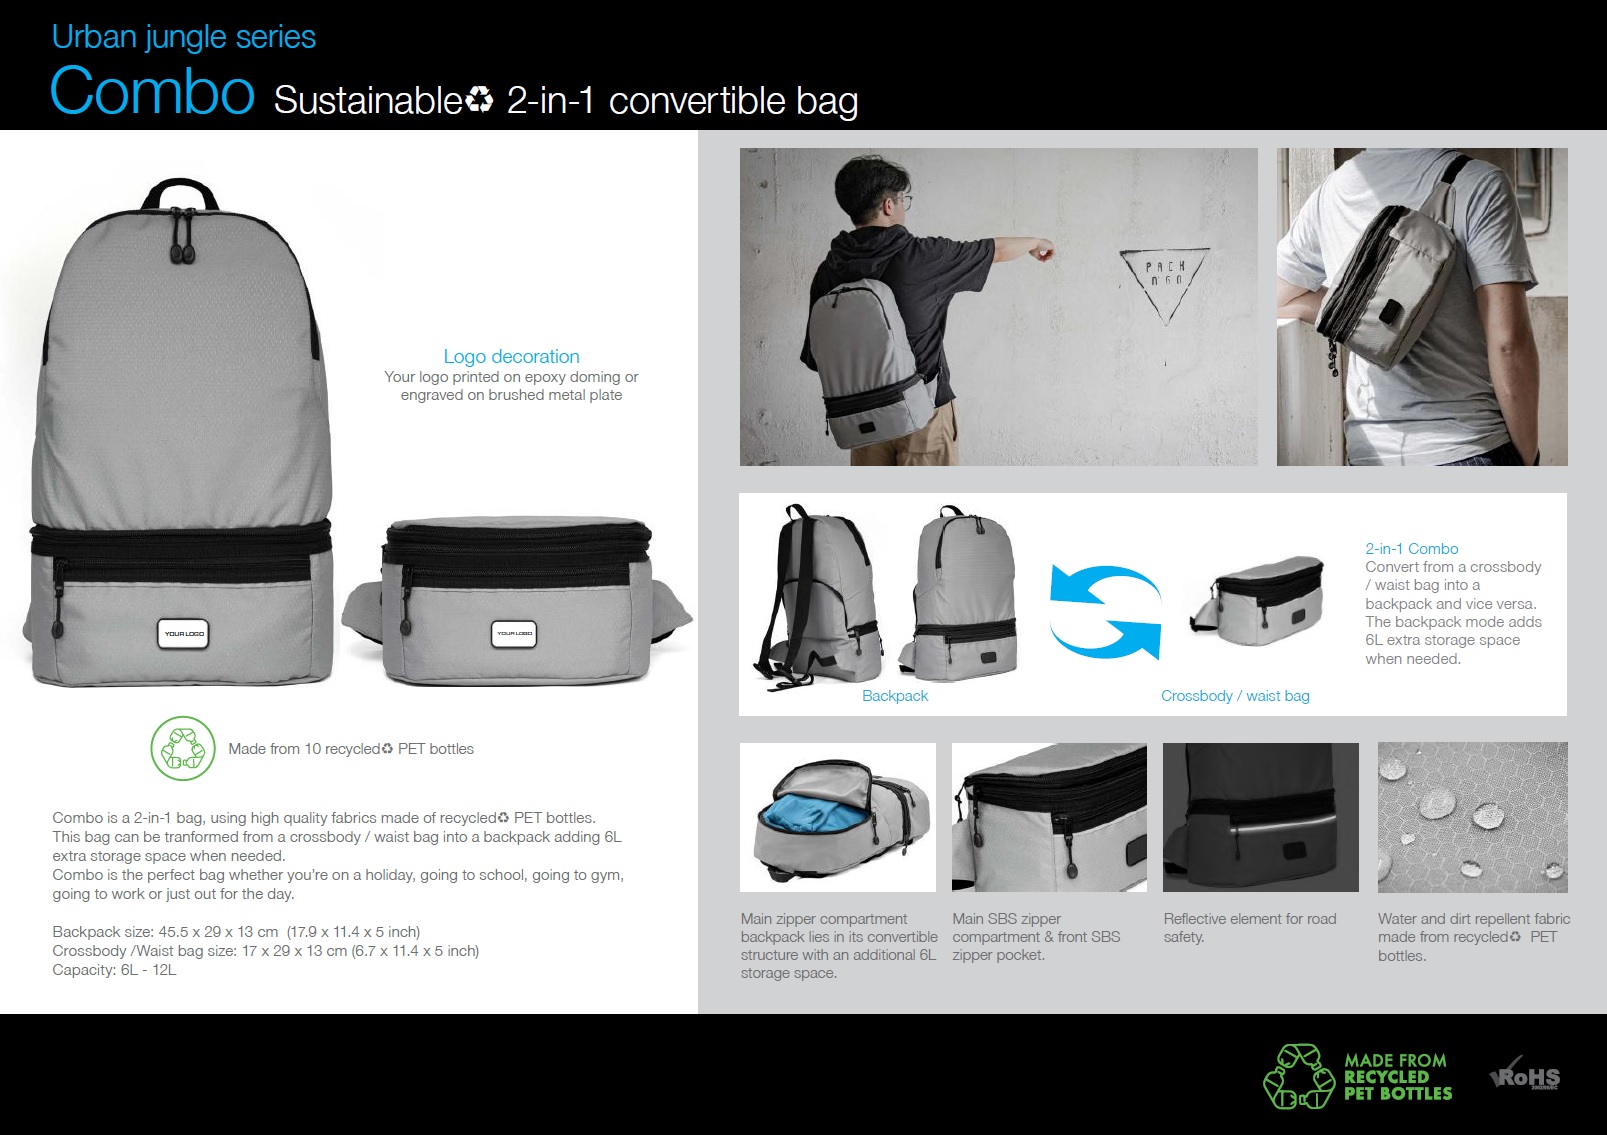 Combo Eco, the sustainable ♻ 2-in-1 convertible bag